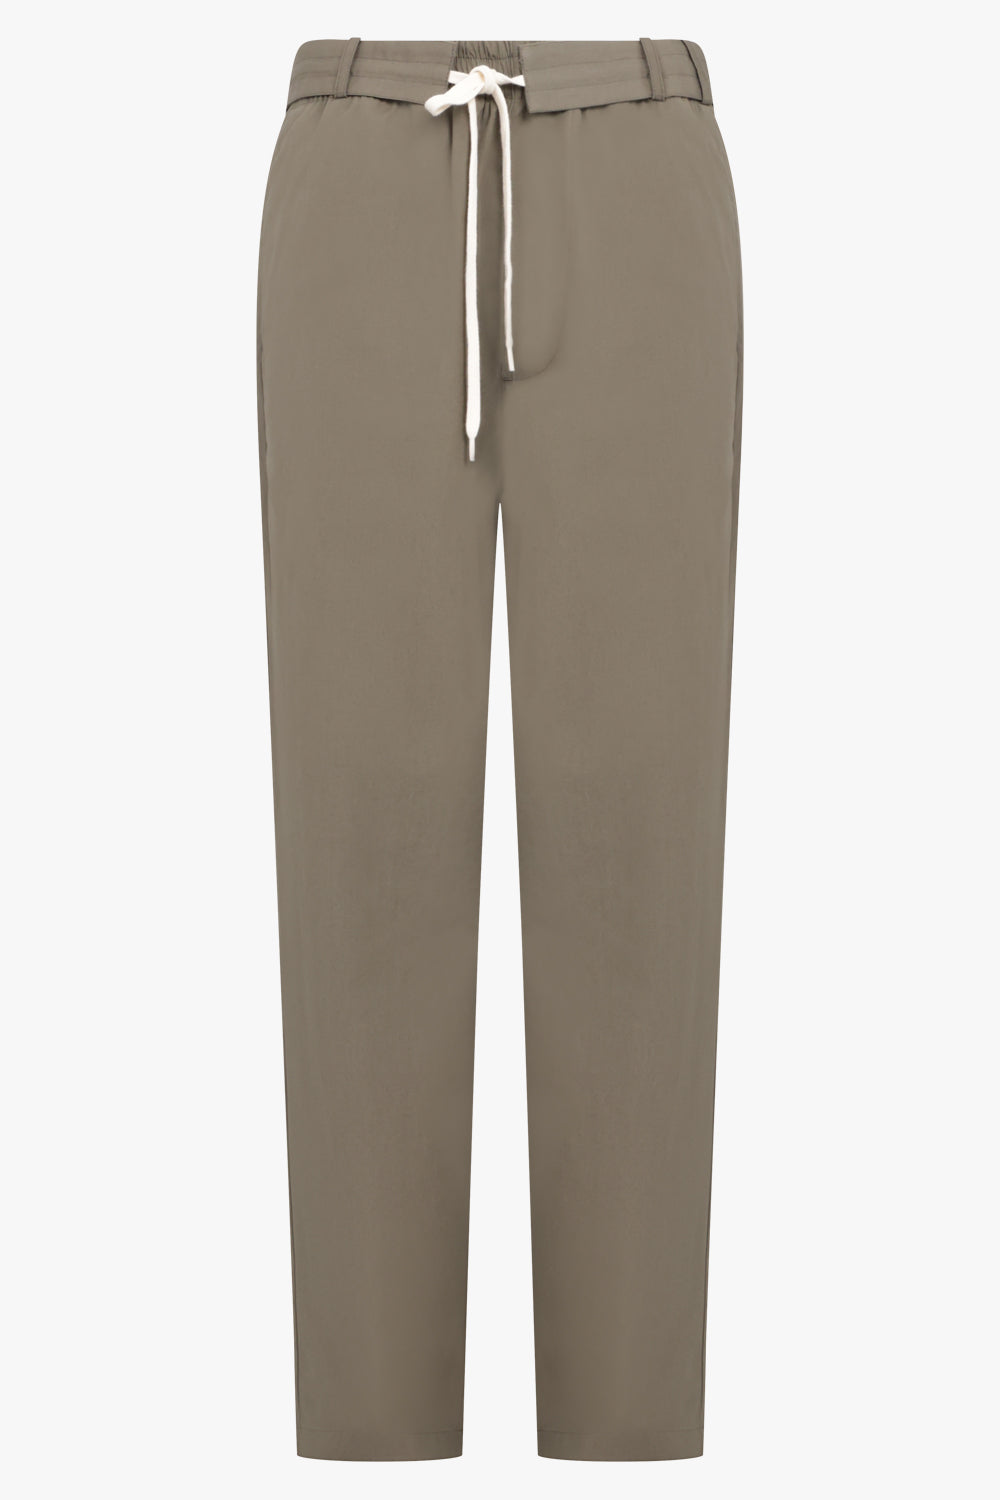 CRAIG GREEN PANTS CIRCLE WORKER TROUSER | OLIVE